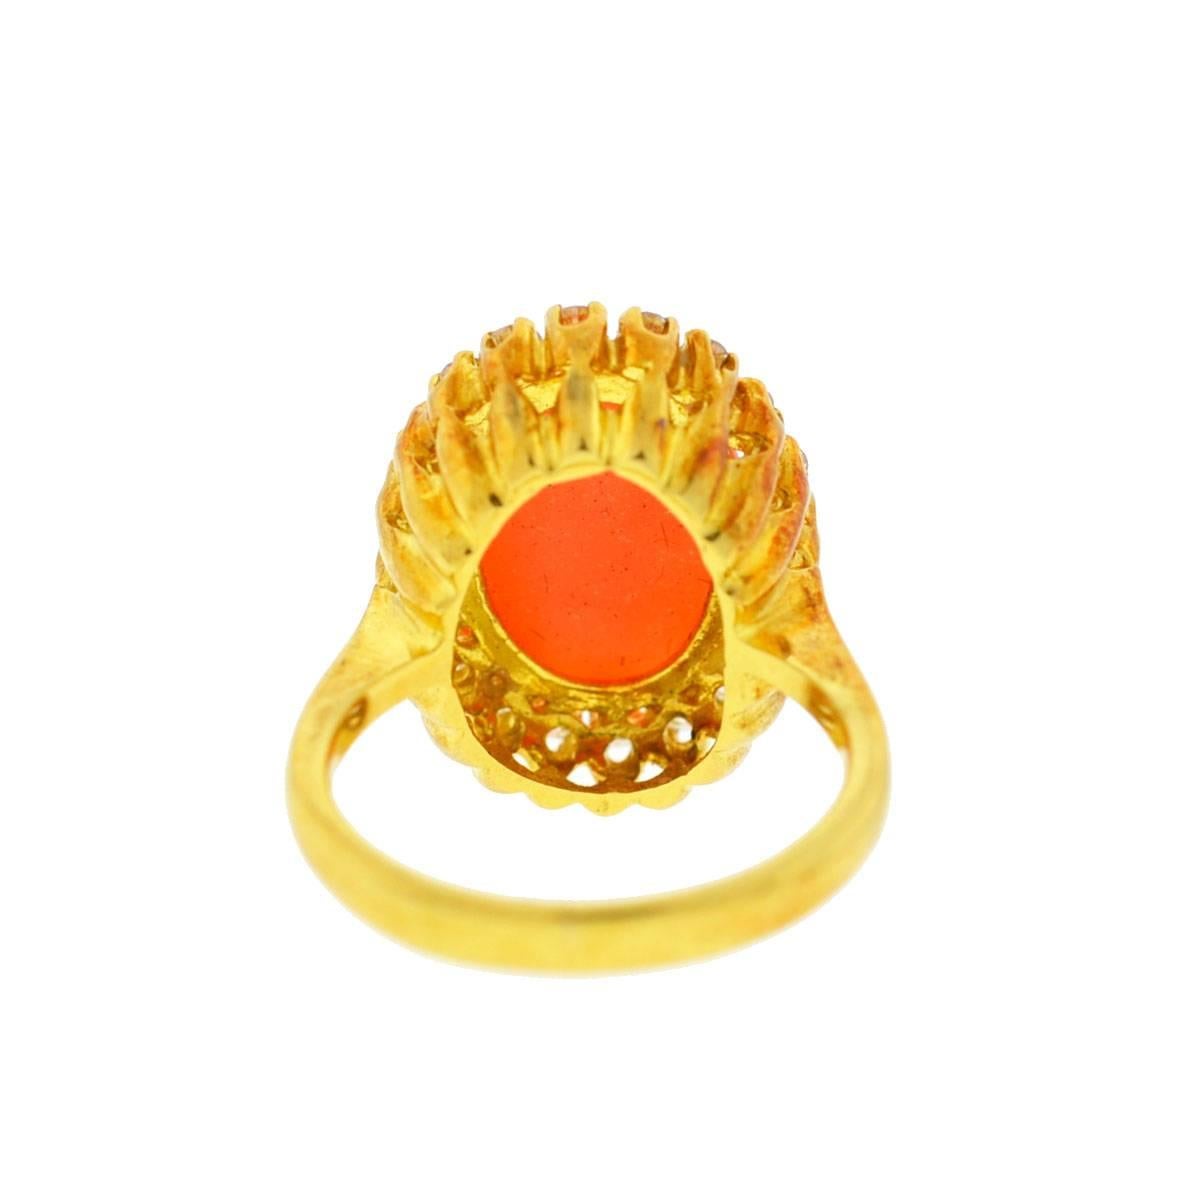 Women's Tiffany & Co. 18 Karat Yellow Gold Oval Coral Stone Ring with Diamonds